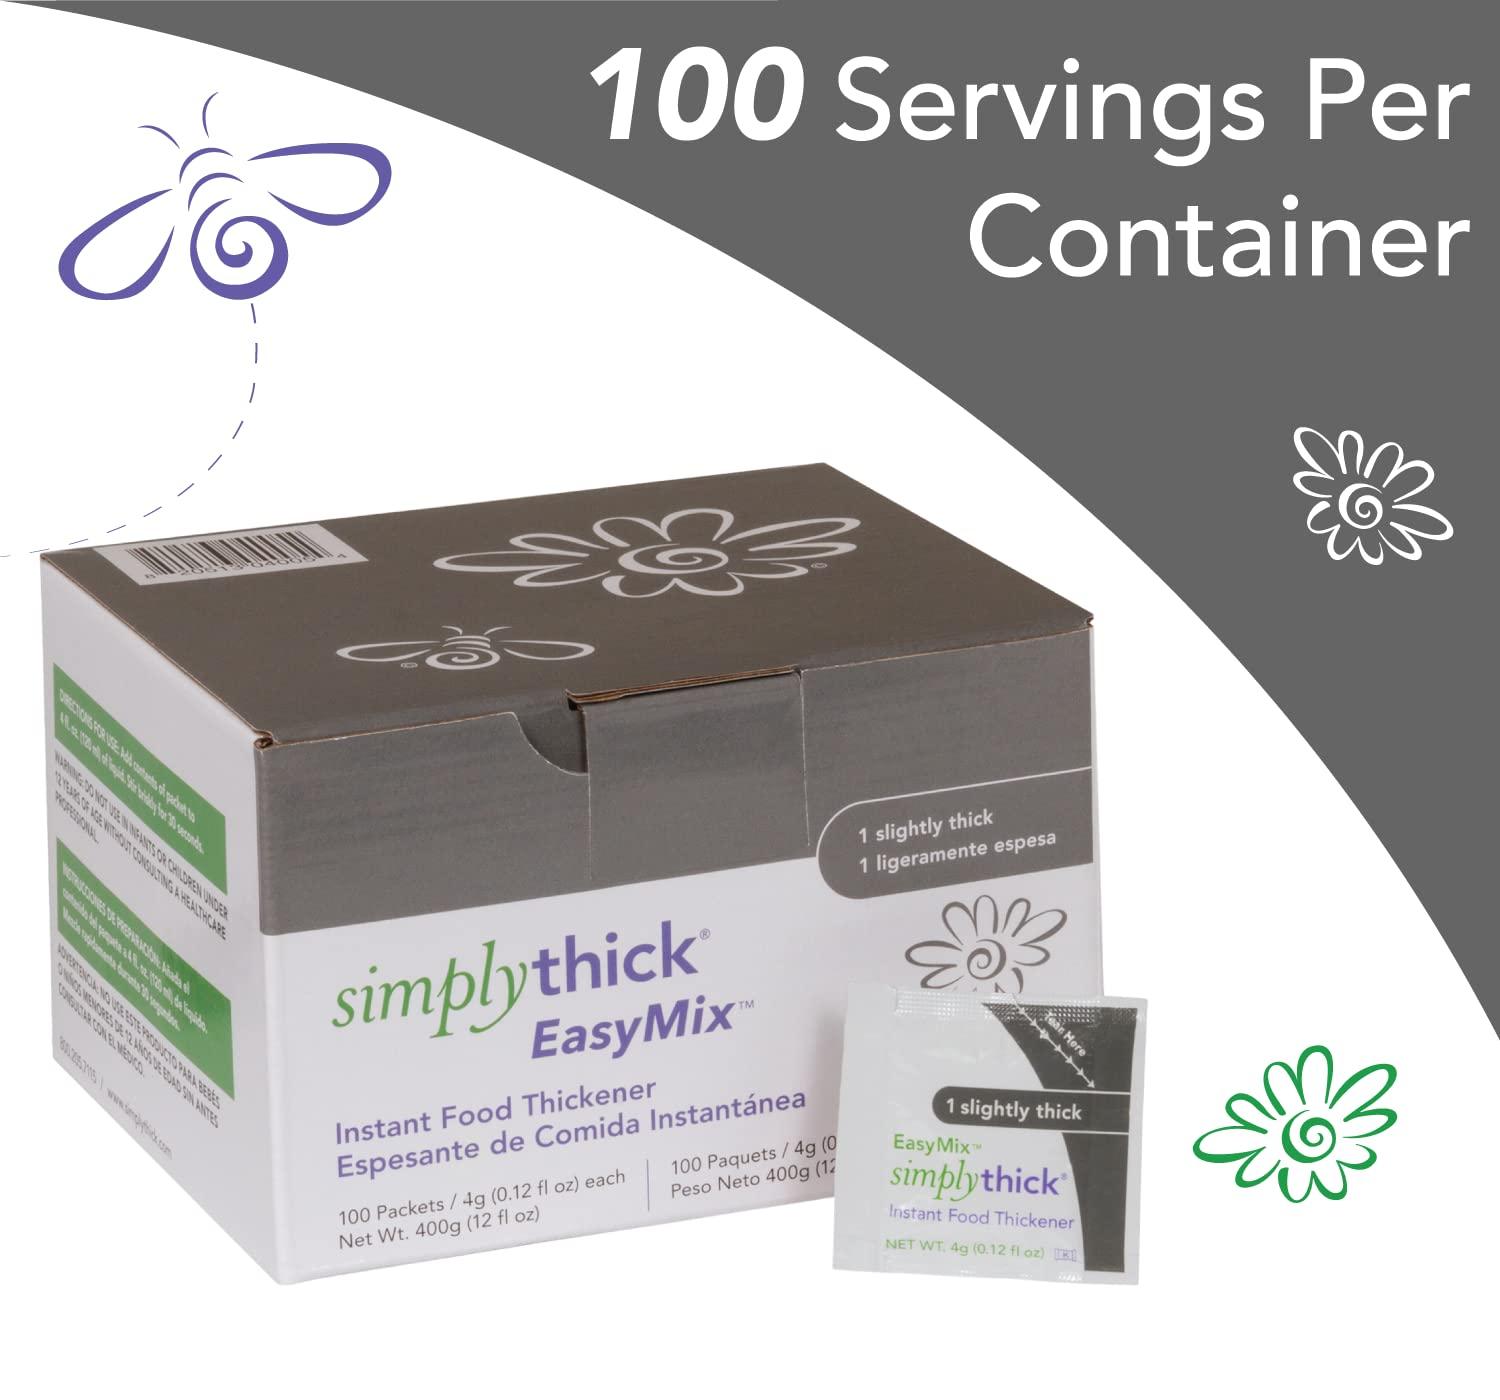  SimplyThick EasyMix, 50 Count of 48g Bulk-Serving Packets, Gel Thickener for Those with Dysphagia & Swallowing Disorders